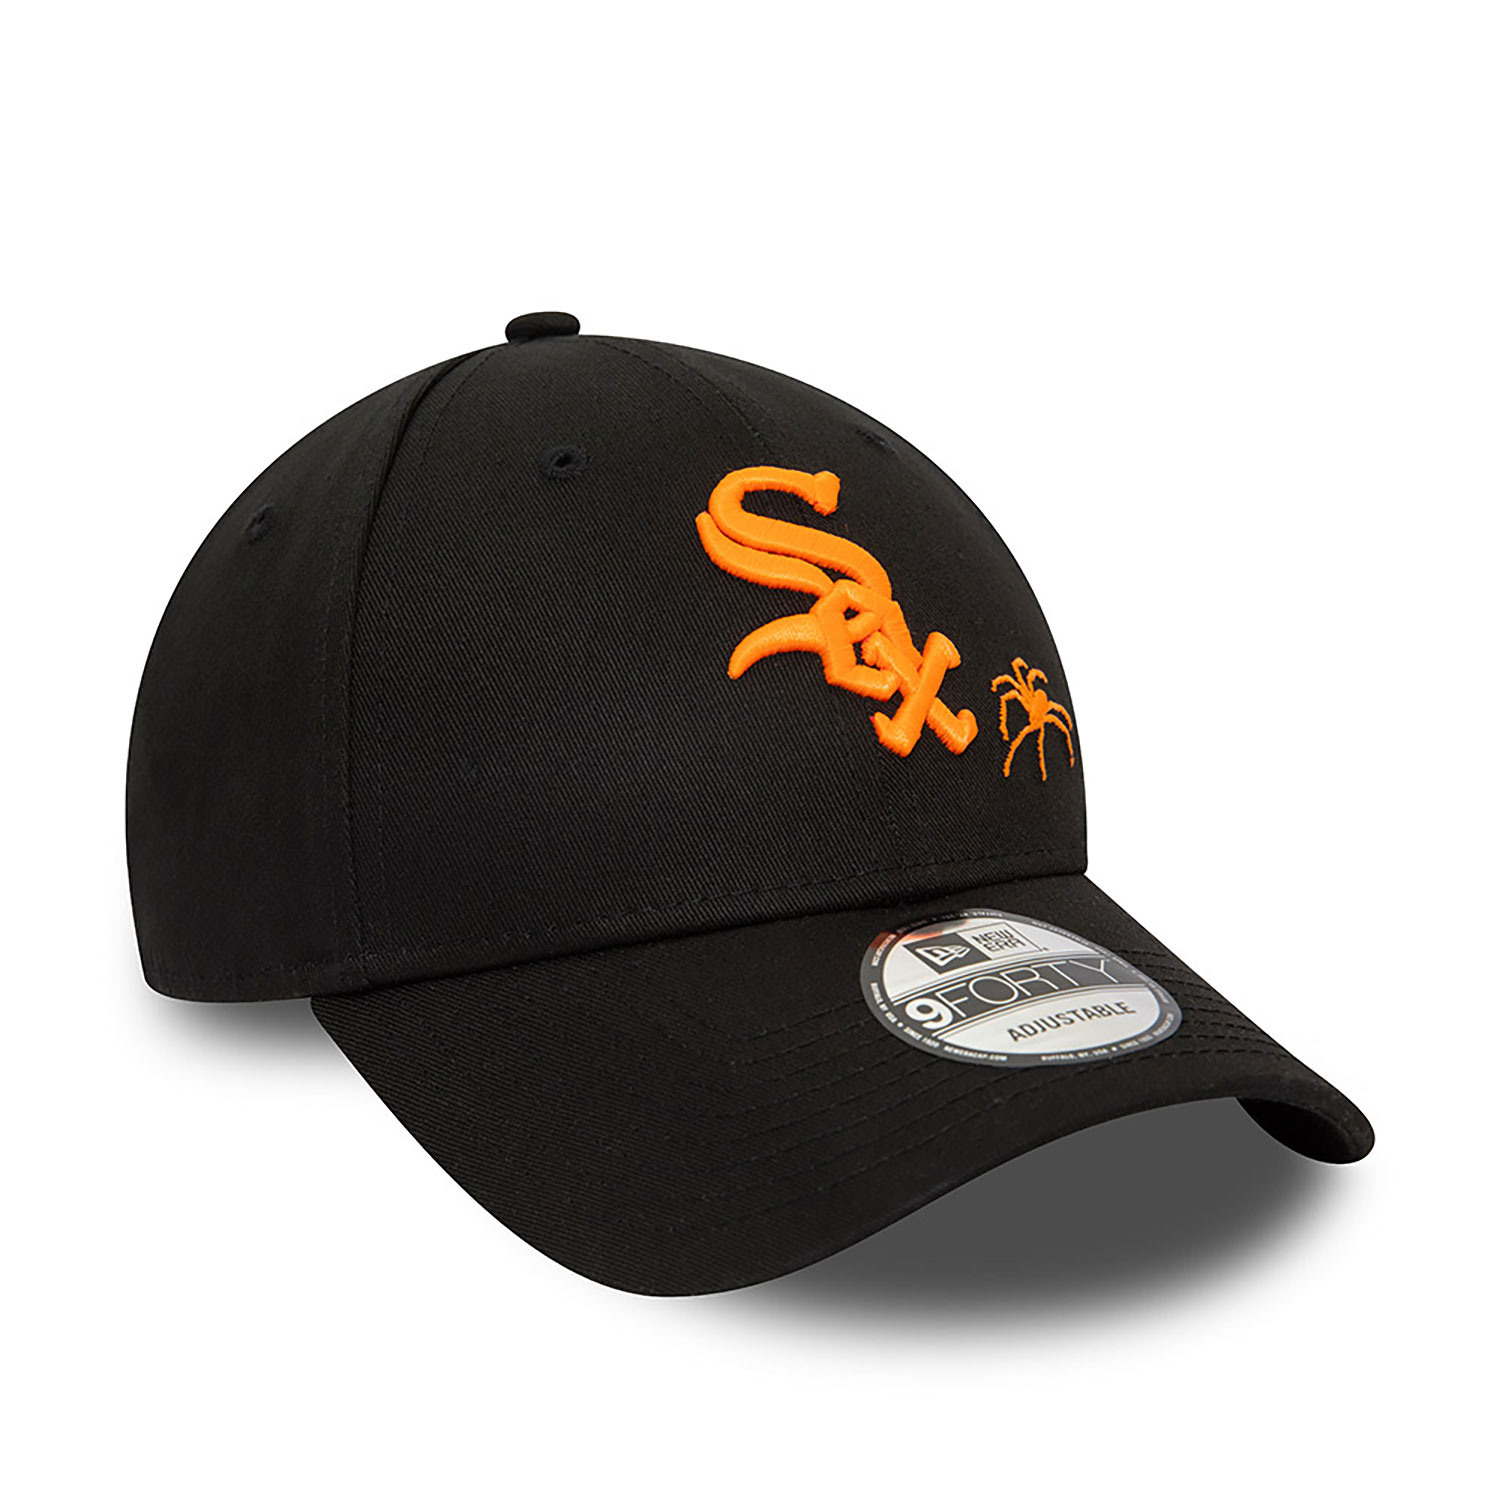 Chicago White Sox Glow In The Dark Spider Web Black 9FORTY Adjustable Cap